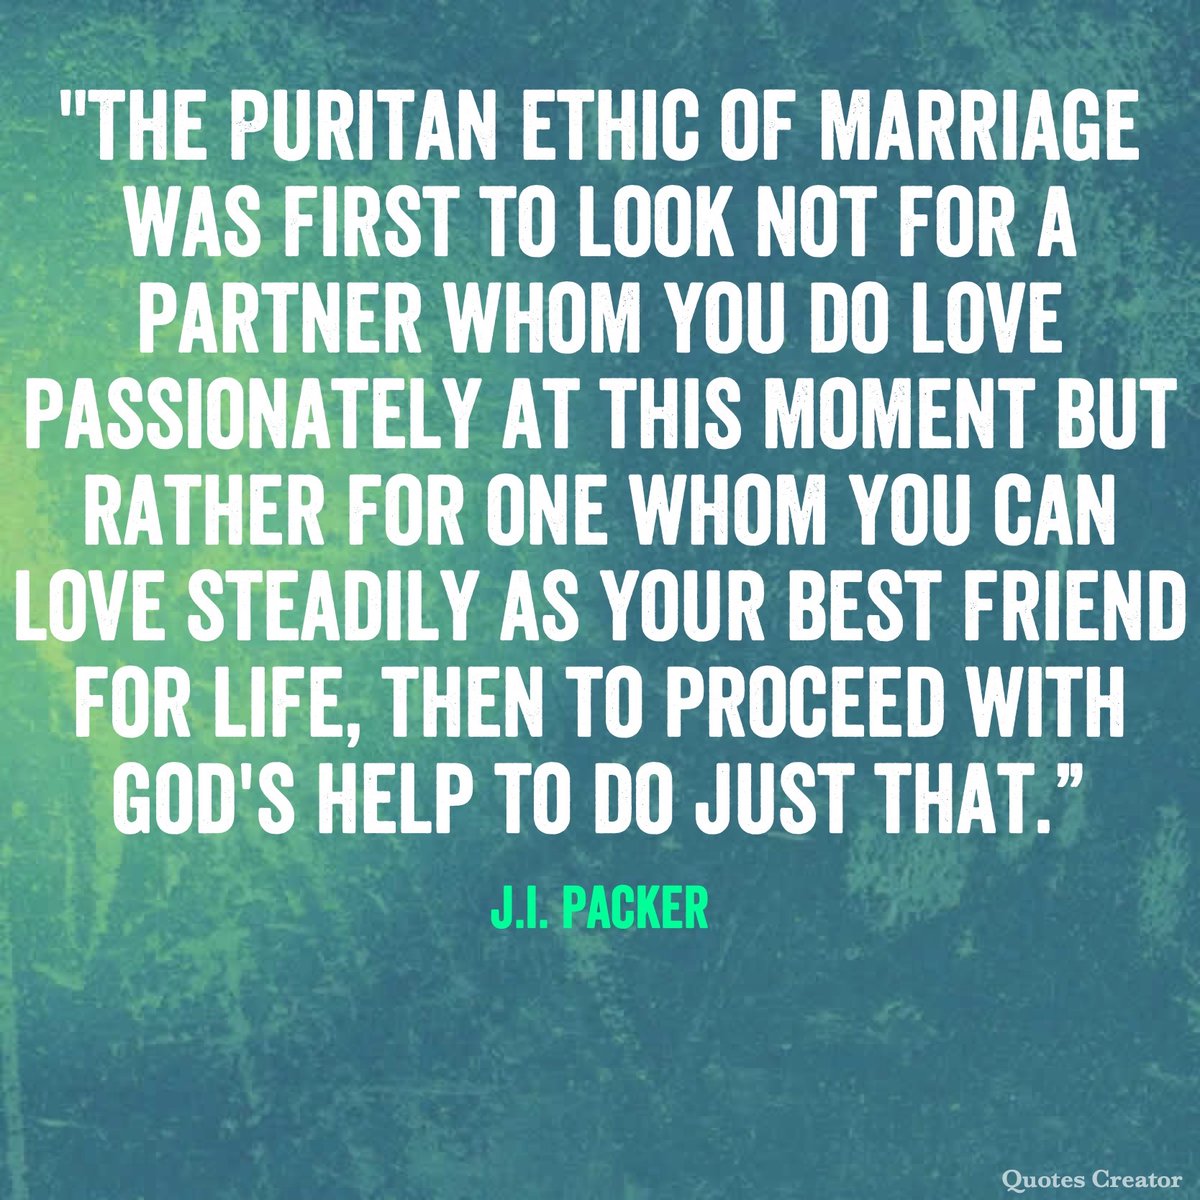 'The Puritan ethic of #marriage was first to look not for a partner whom you do love passionately at this moment but rather for one whom you can love steadily as your best friend for life, then to proceed with God's help to do just that.” — J.I. Packer #QutoteOfTheDay #TrustGod